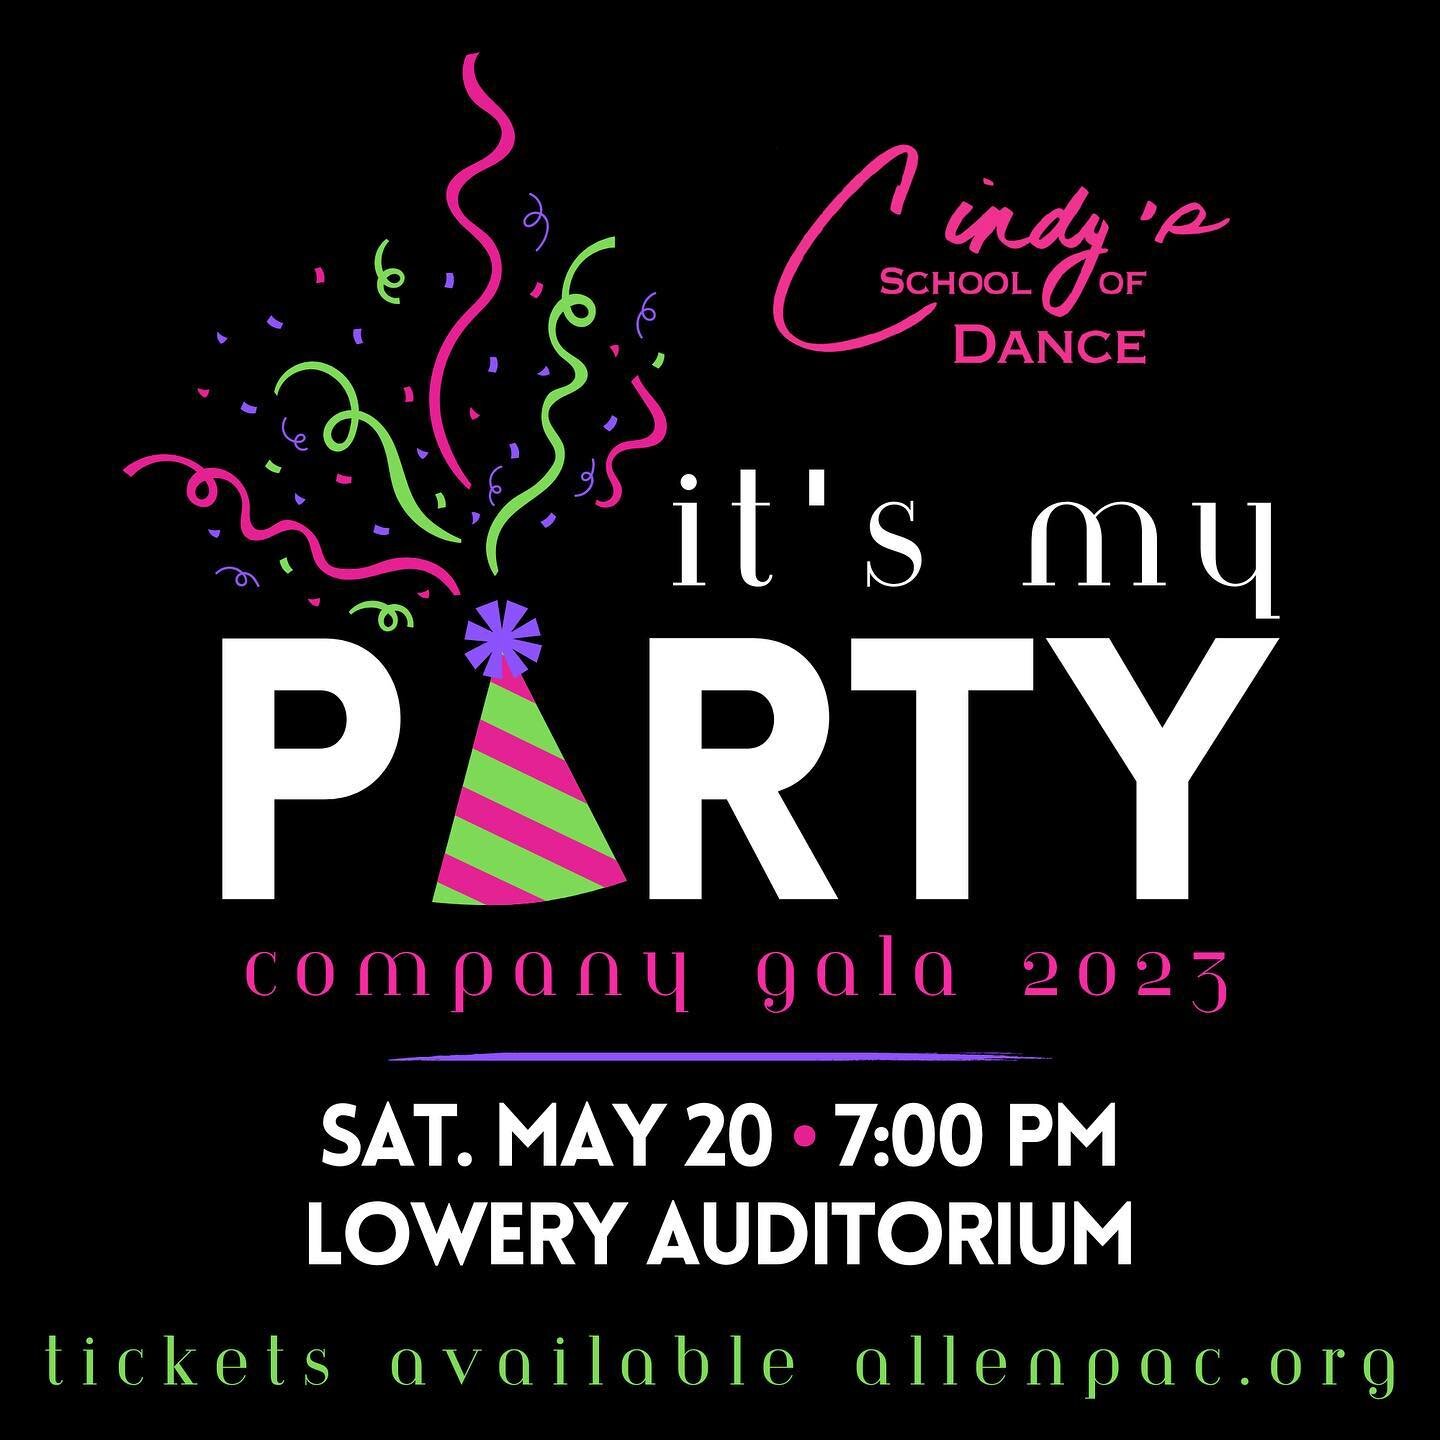 It&rsquo;s Gala Time! Come support our Company Dancers in their annual show and see all their routines from the year in one night. #dancecompany #danceshow #dancegala #csodcompany #csodprepcompany #csoddancers #idanceatcindys #csodyear43 #dancestudio